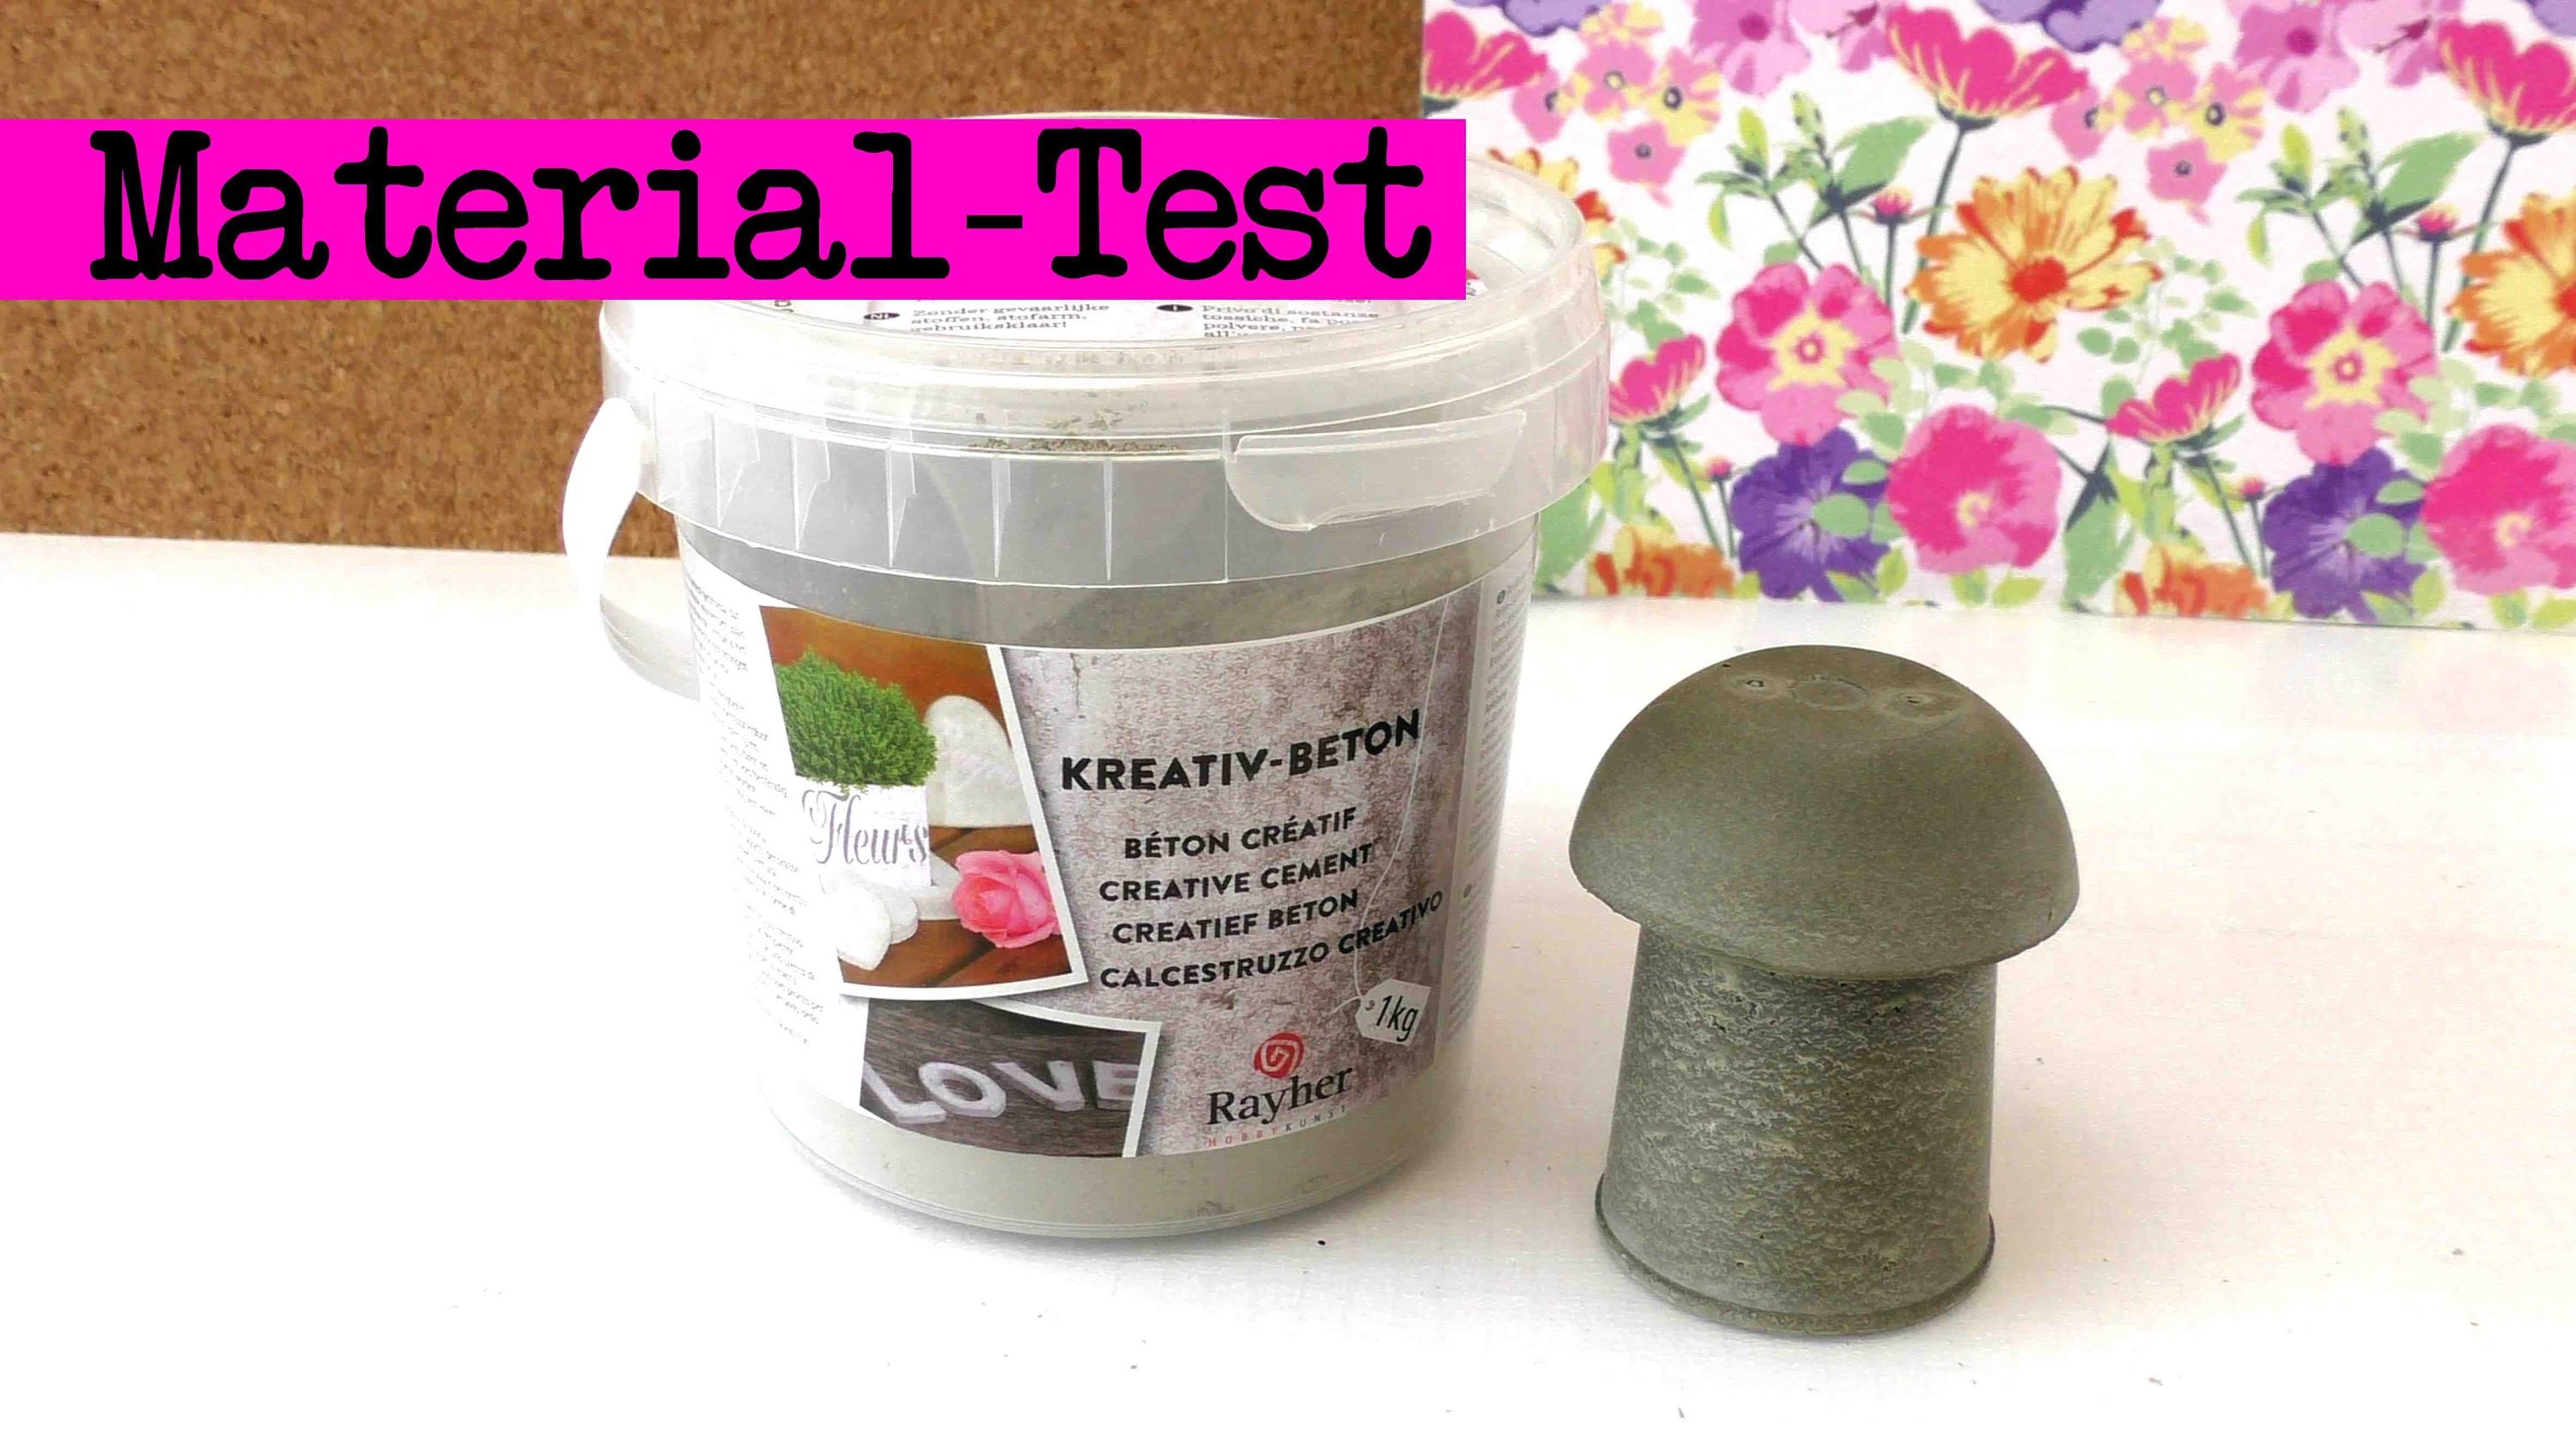 DIY Beton gießen - Material Test youtube Review Video